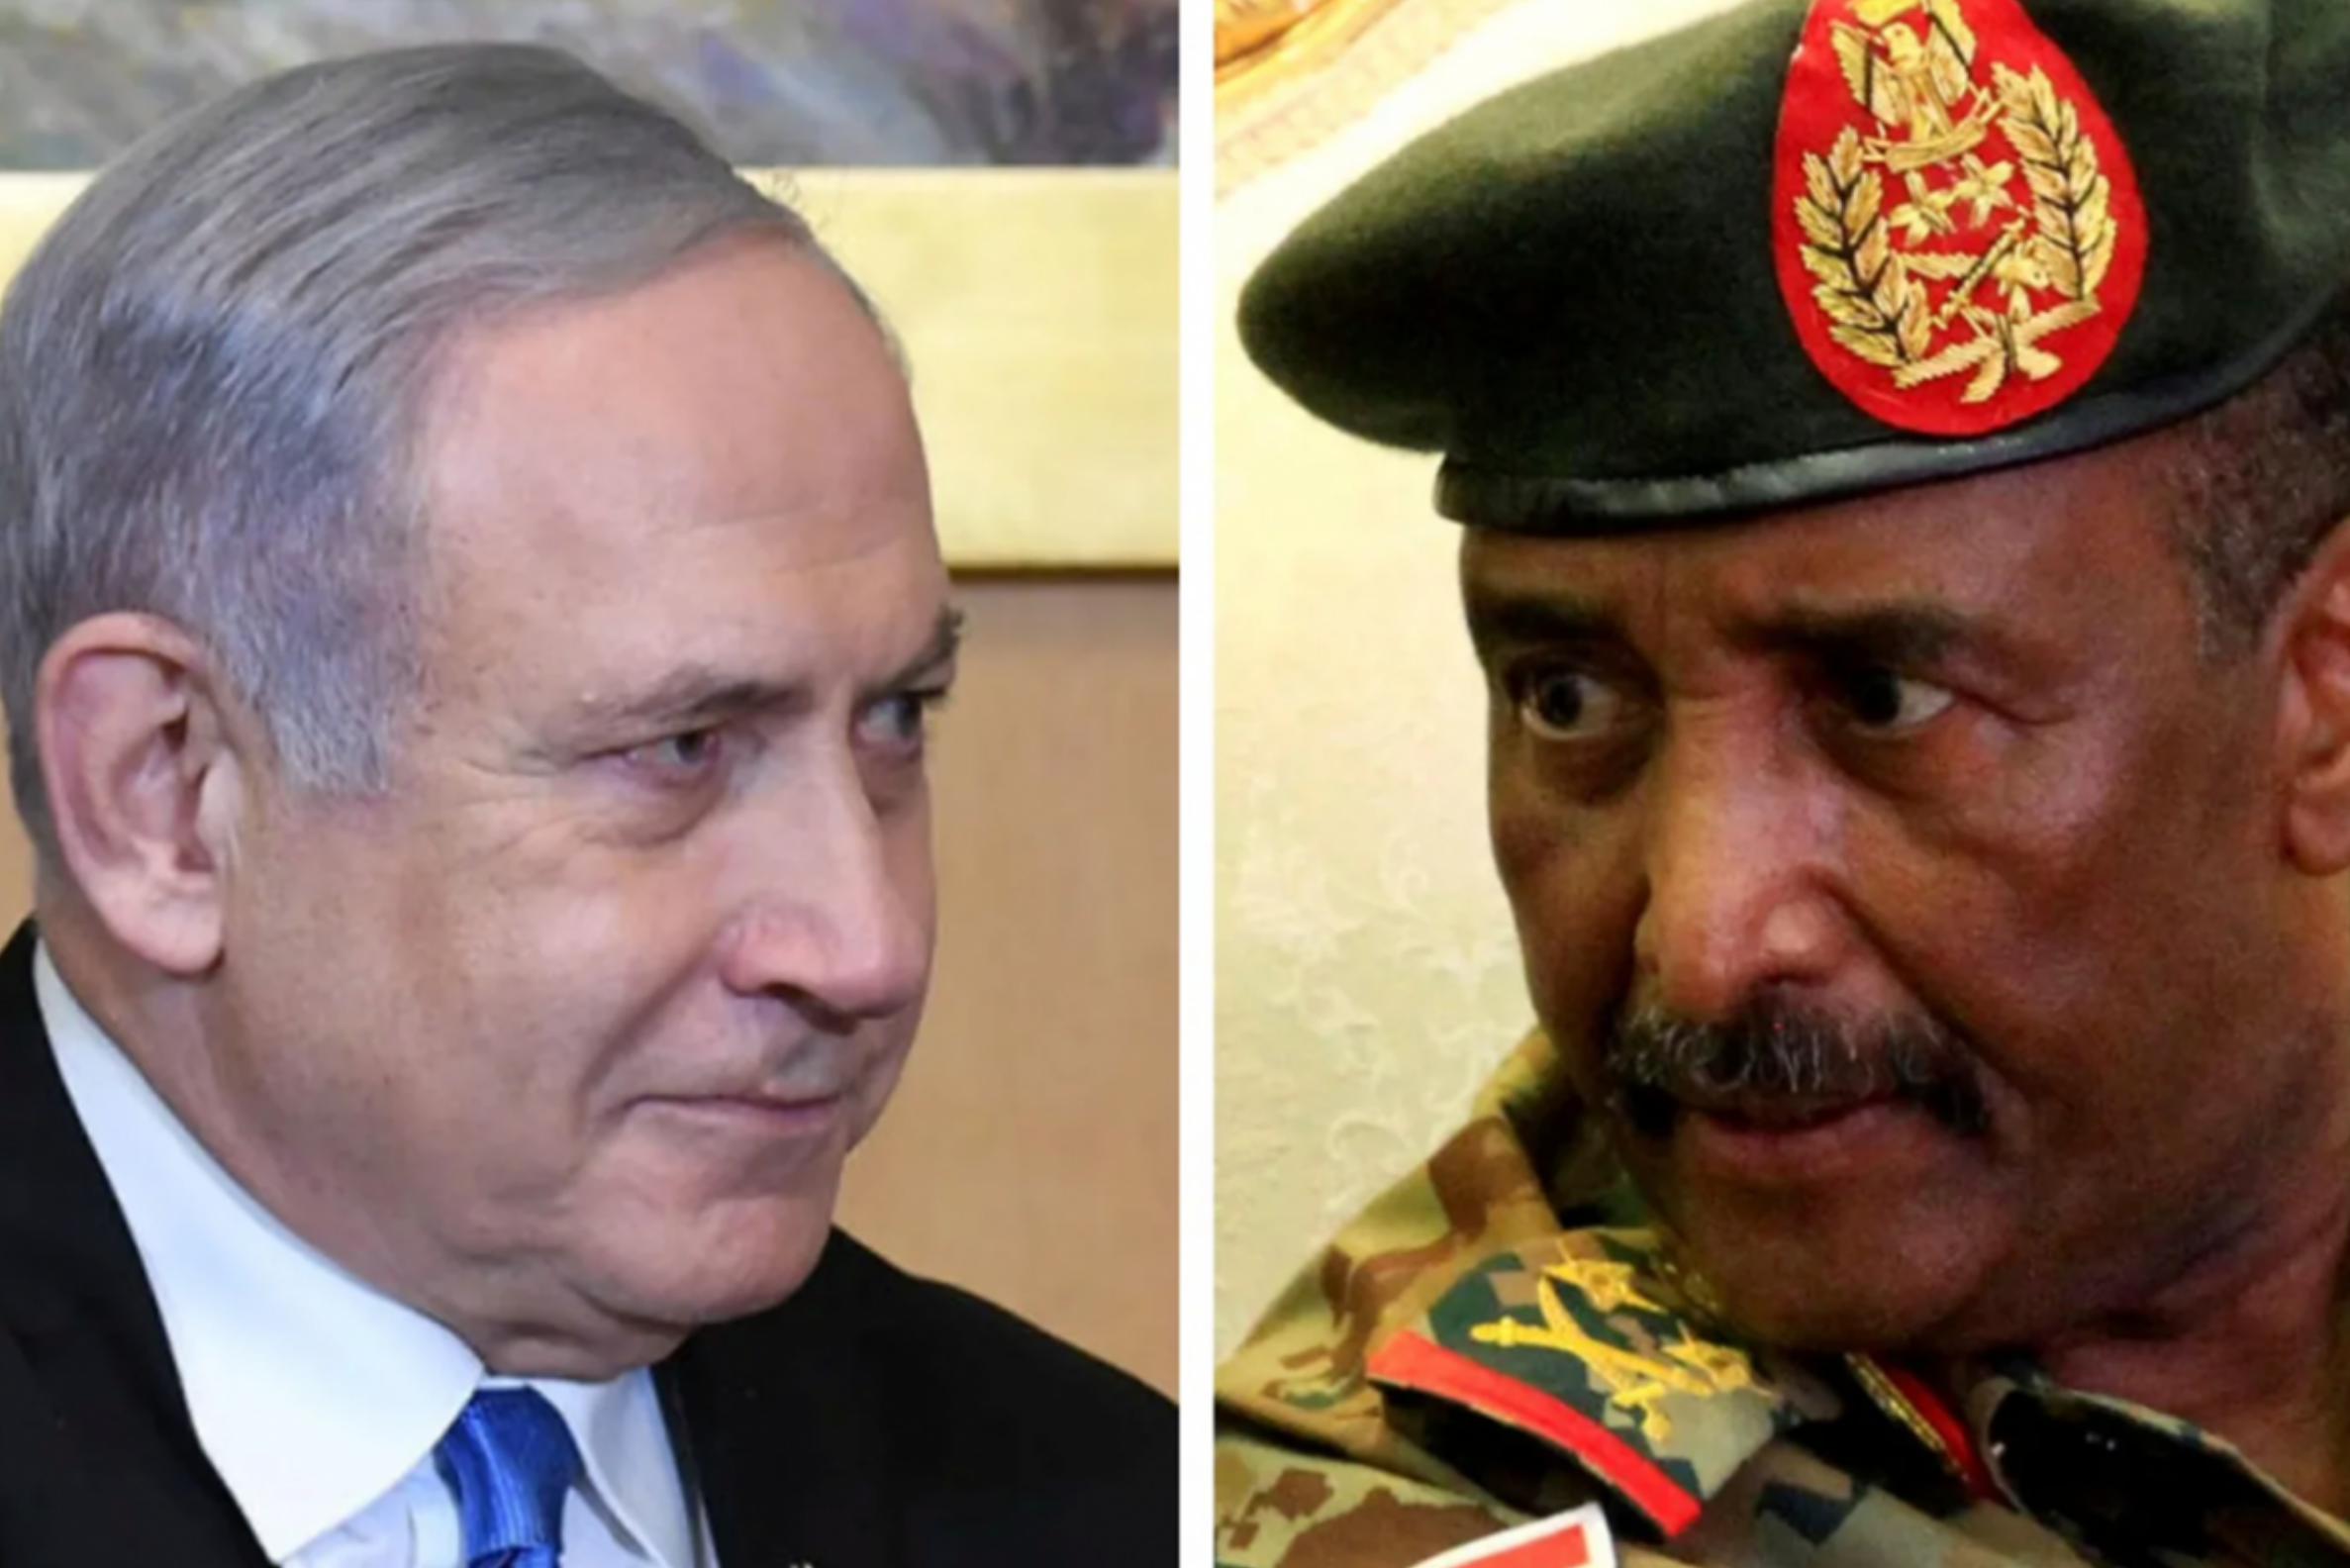 Sudan normalizes relations with Israel, though it may not have had much choice